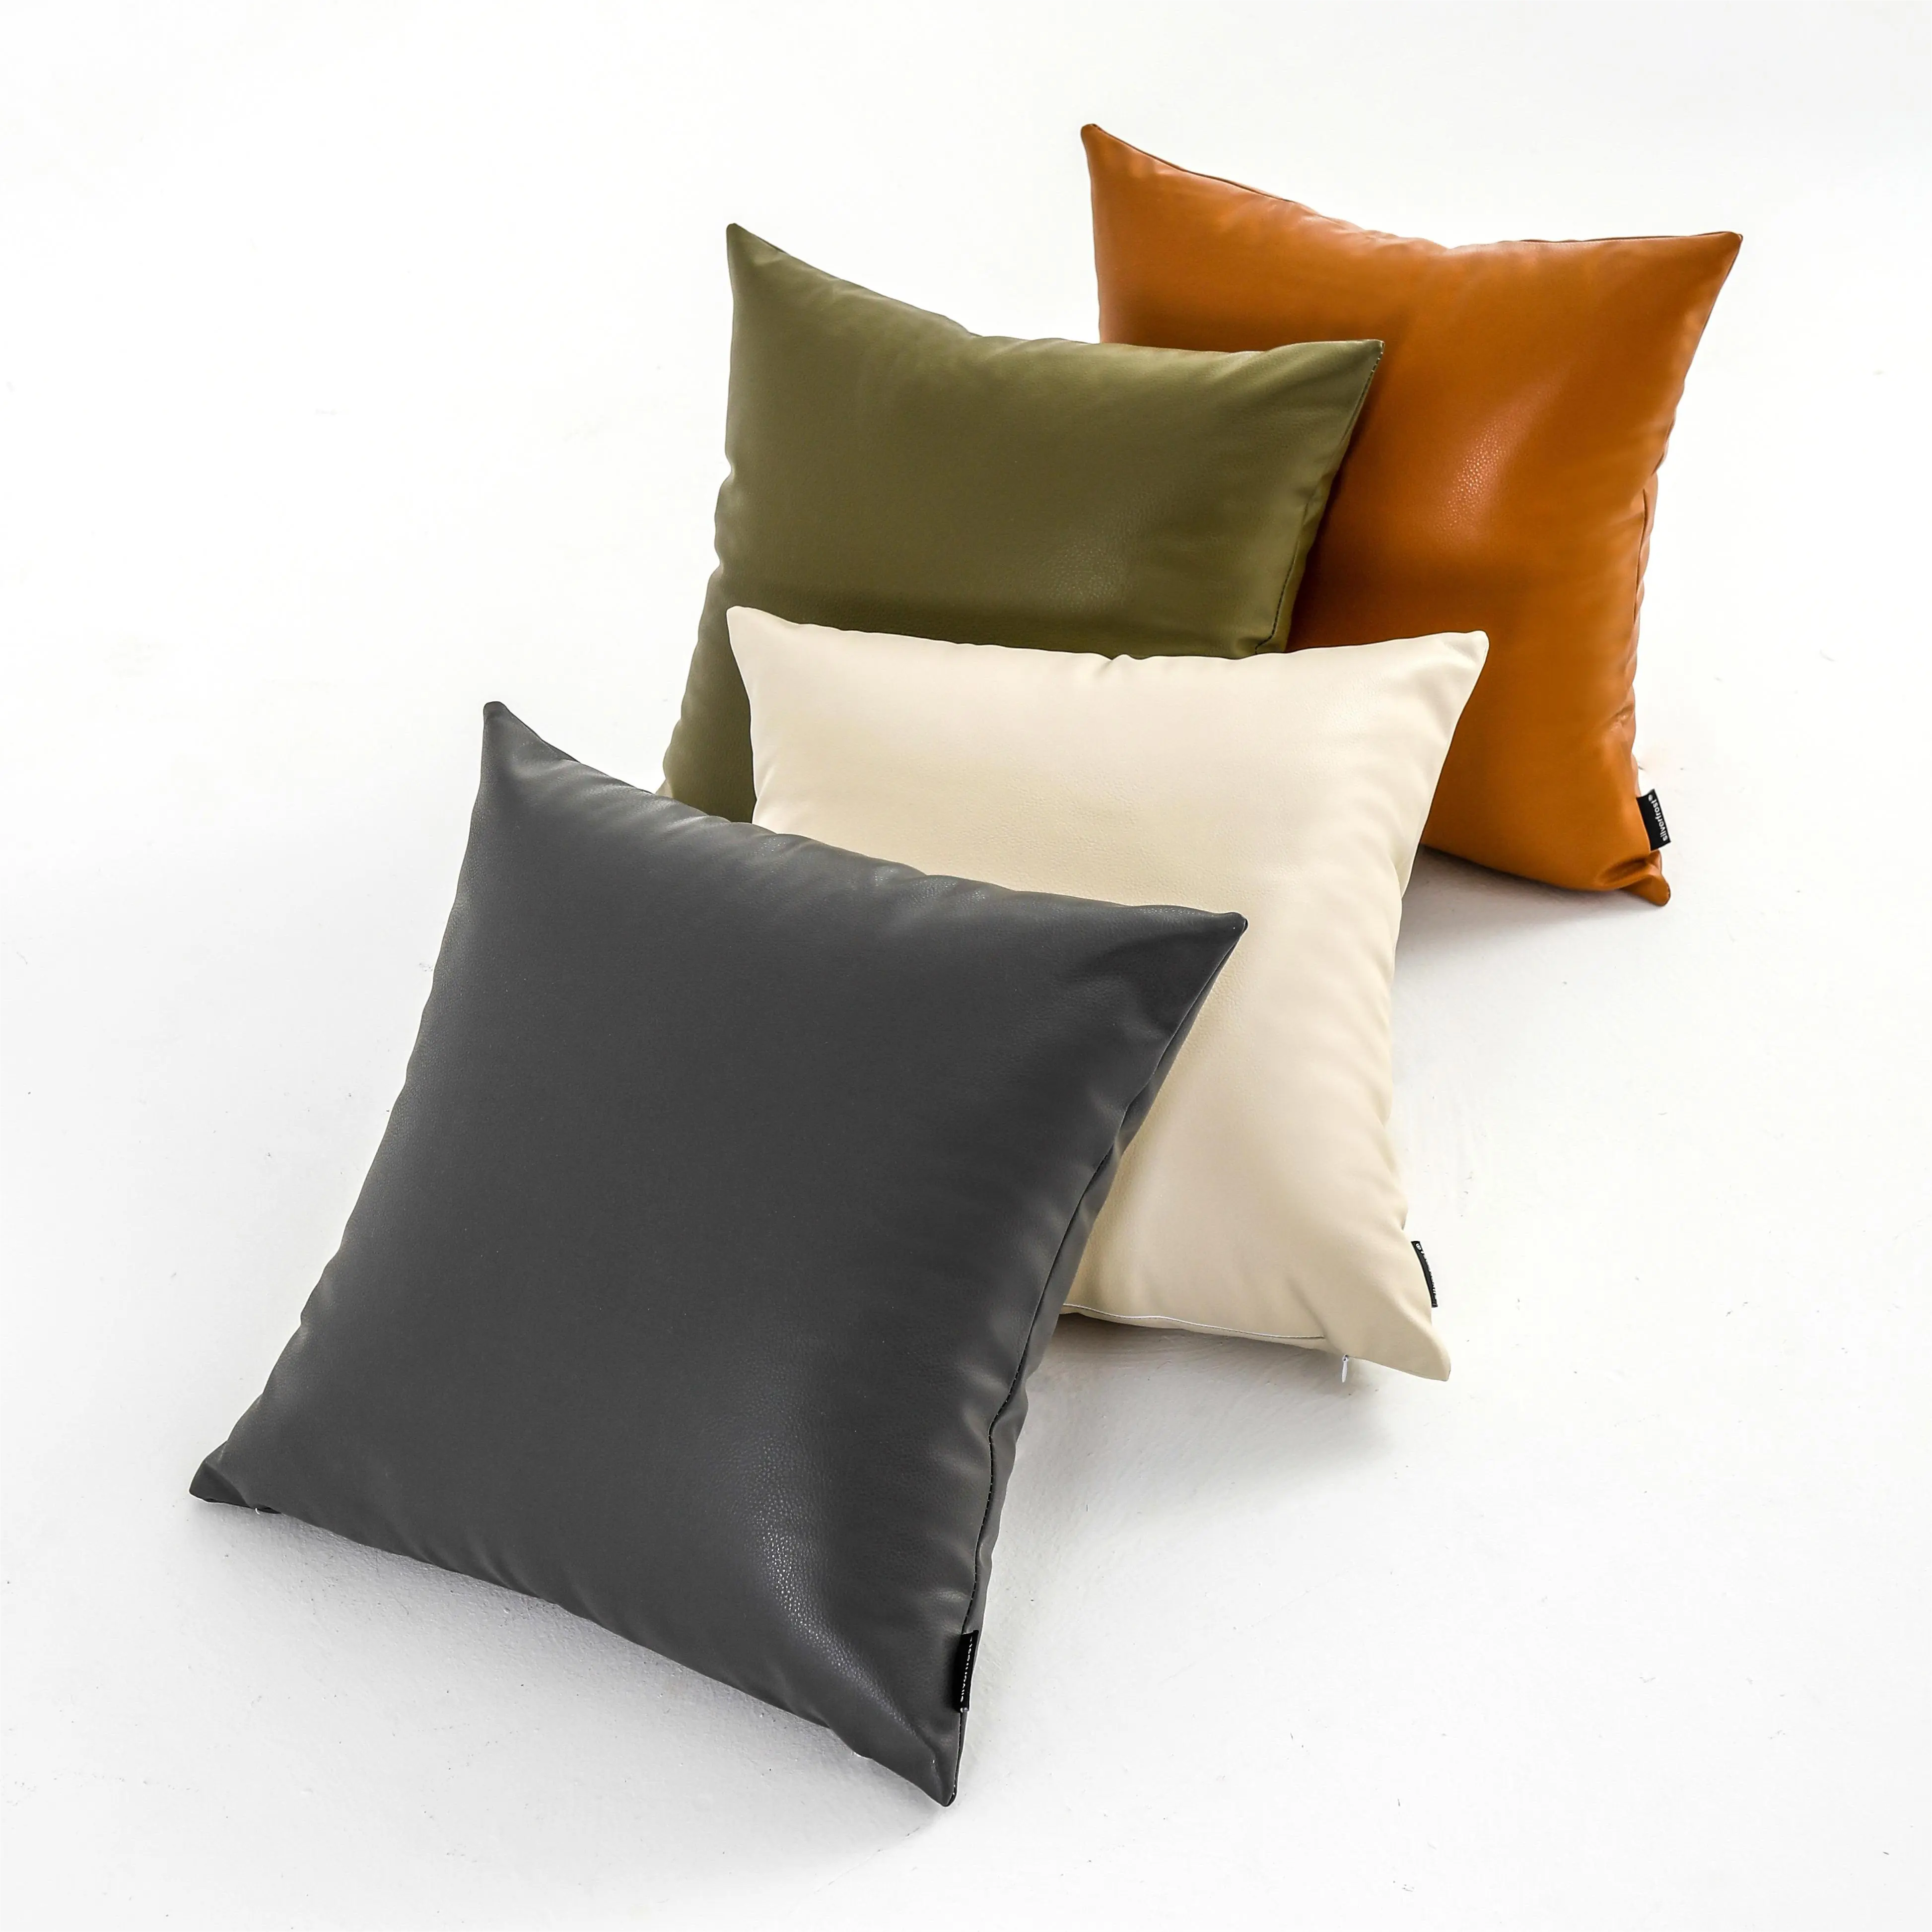 Luxury Decorative Personalized Throw Pillow Covers 18x18 Faux Leather Cushion Cover For Sofa Bed